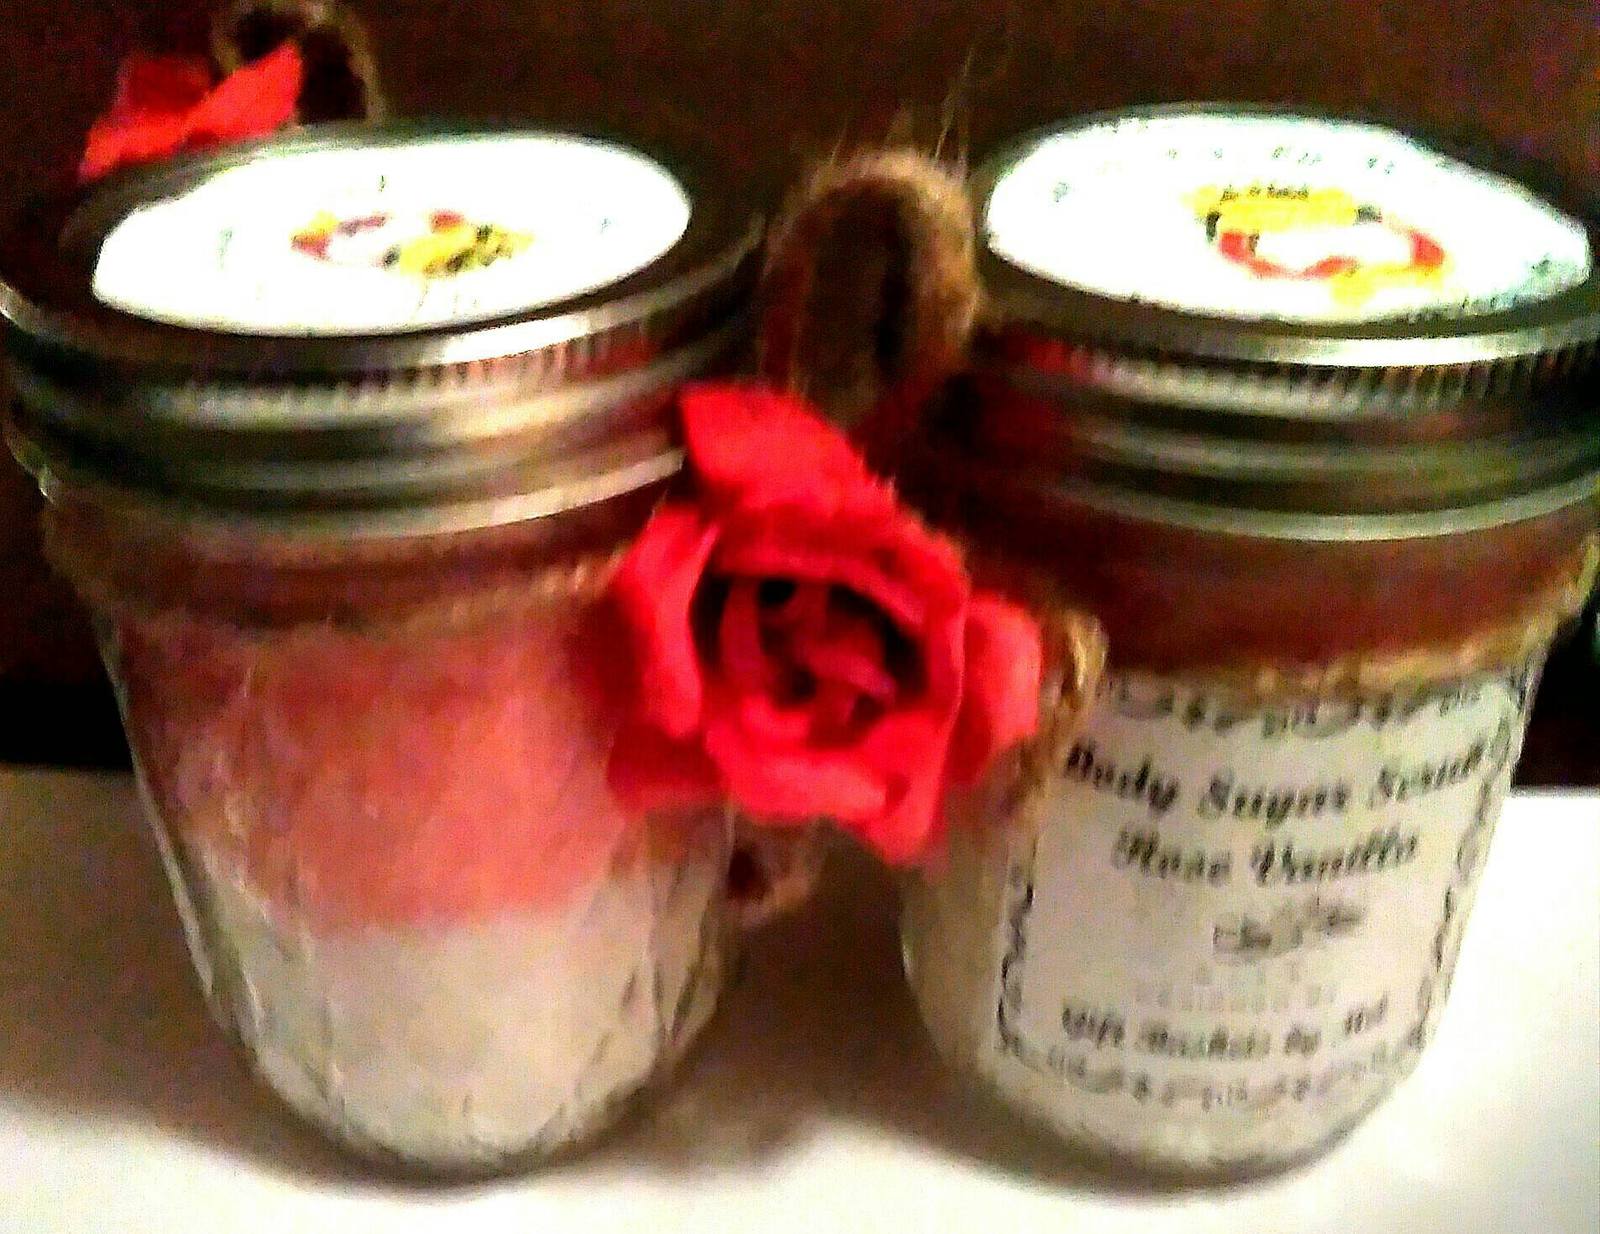 Handmade All Natural Scented Salt Scrub 8 0z 1 cup size with free shipping